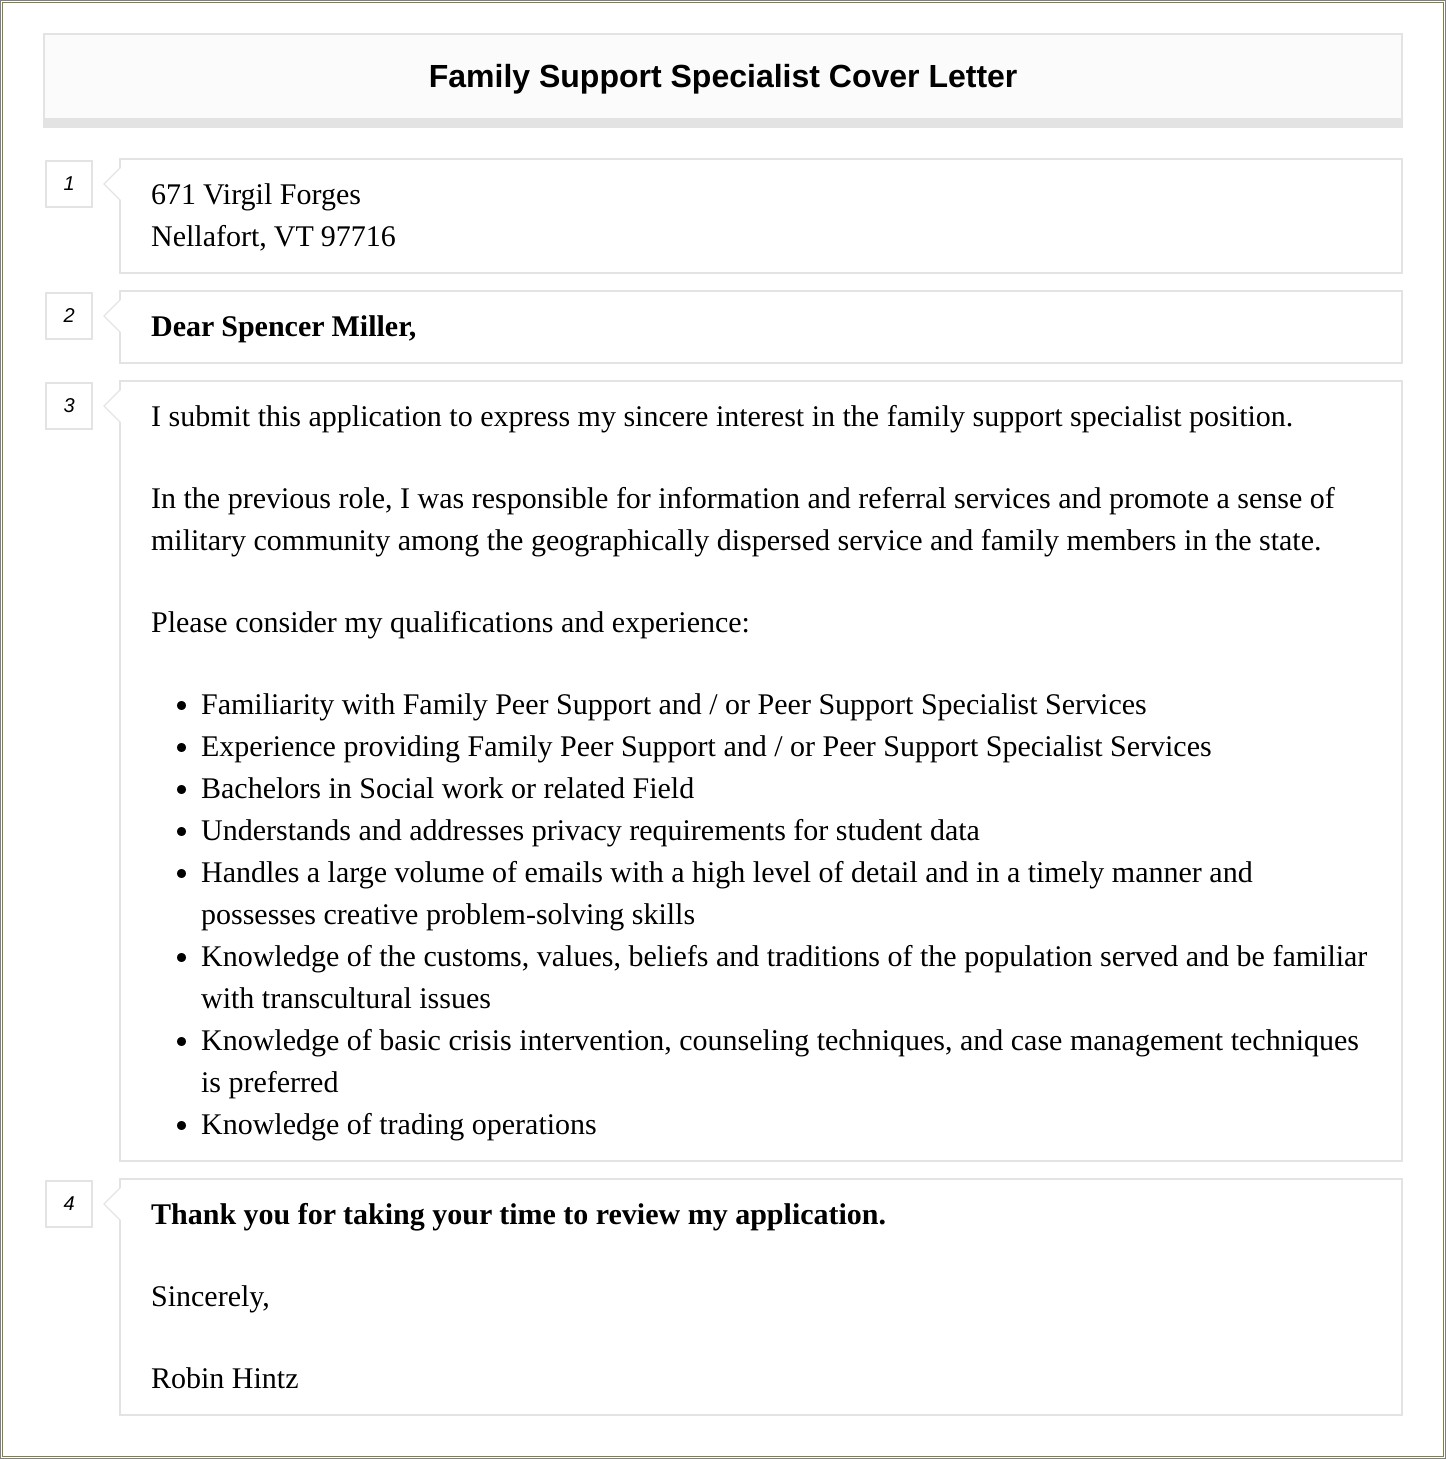 Family Support Specialist Resume Cover Letter